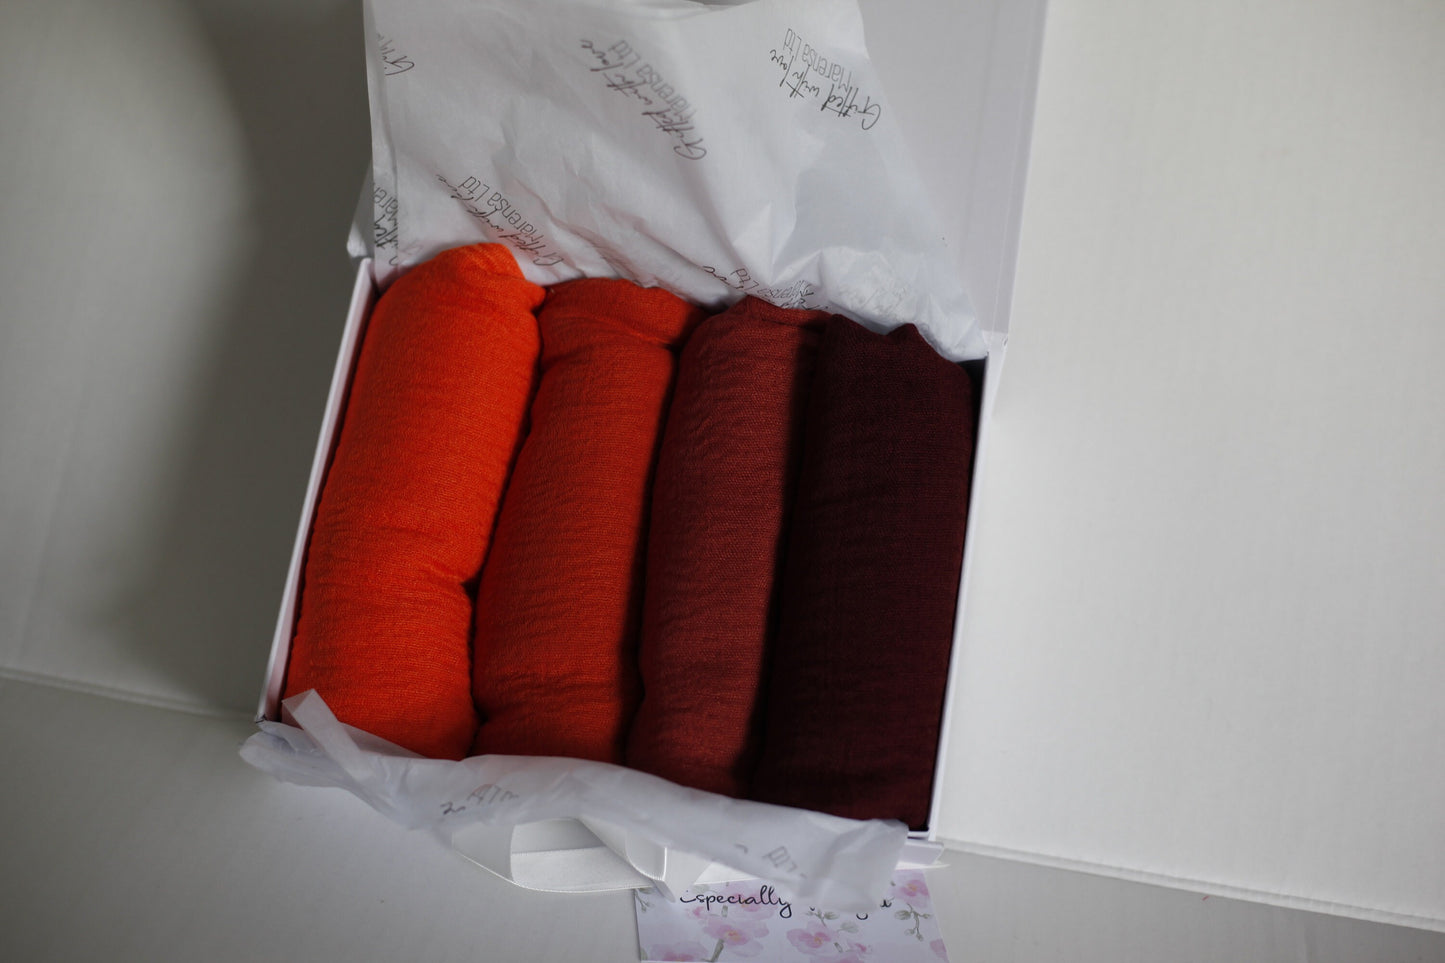 Shades of Orange and maroon crimple scarf with distressed edge, Perfect Eid Hijabs, or if you are gifting hijab gifts, perfectly boxed